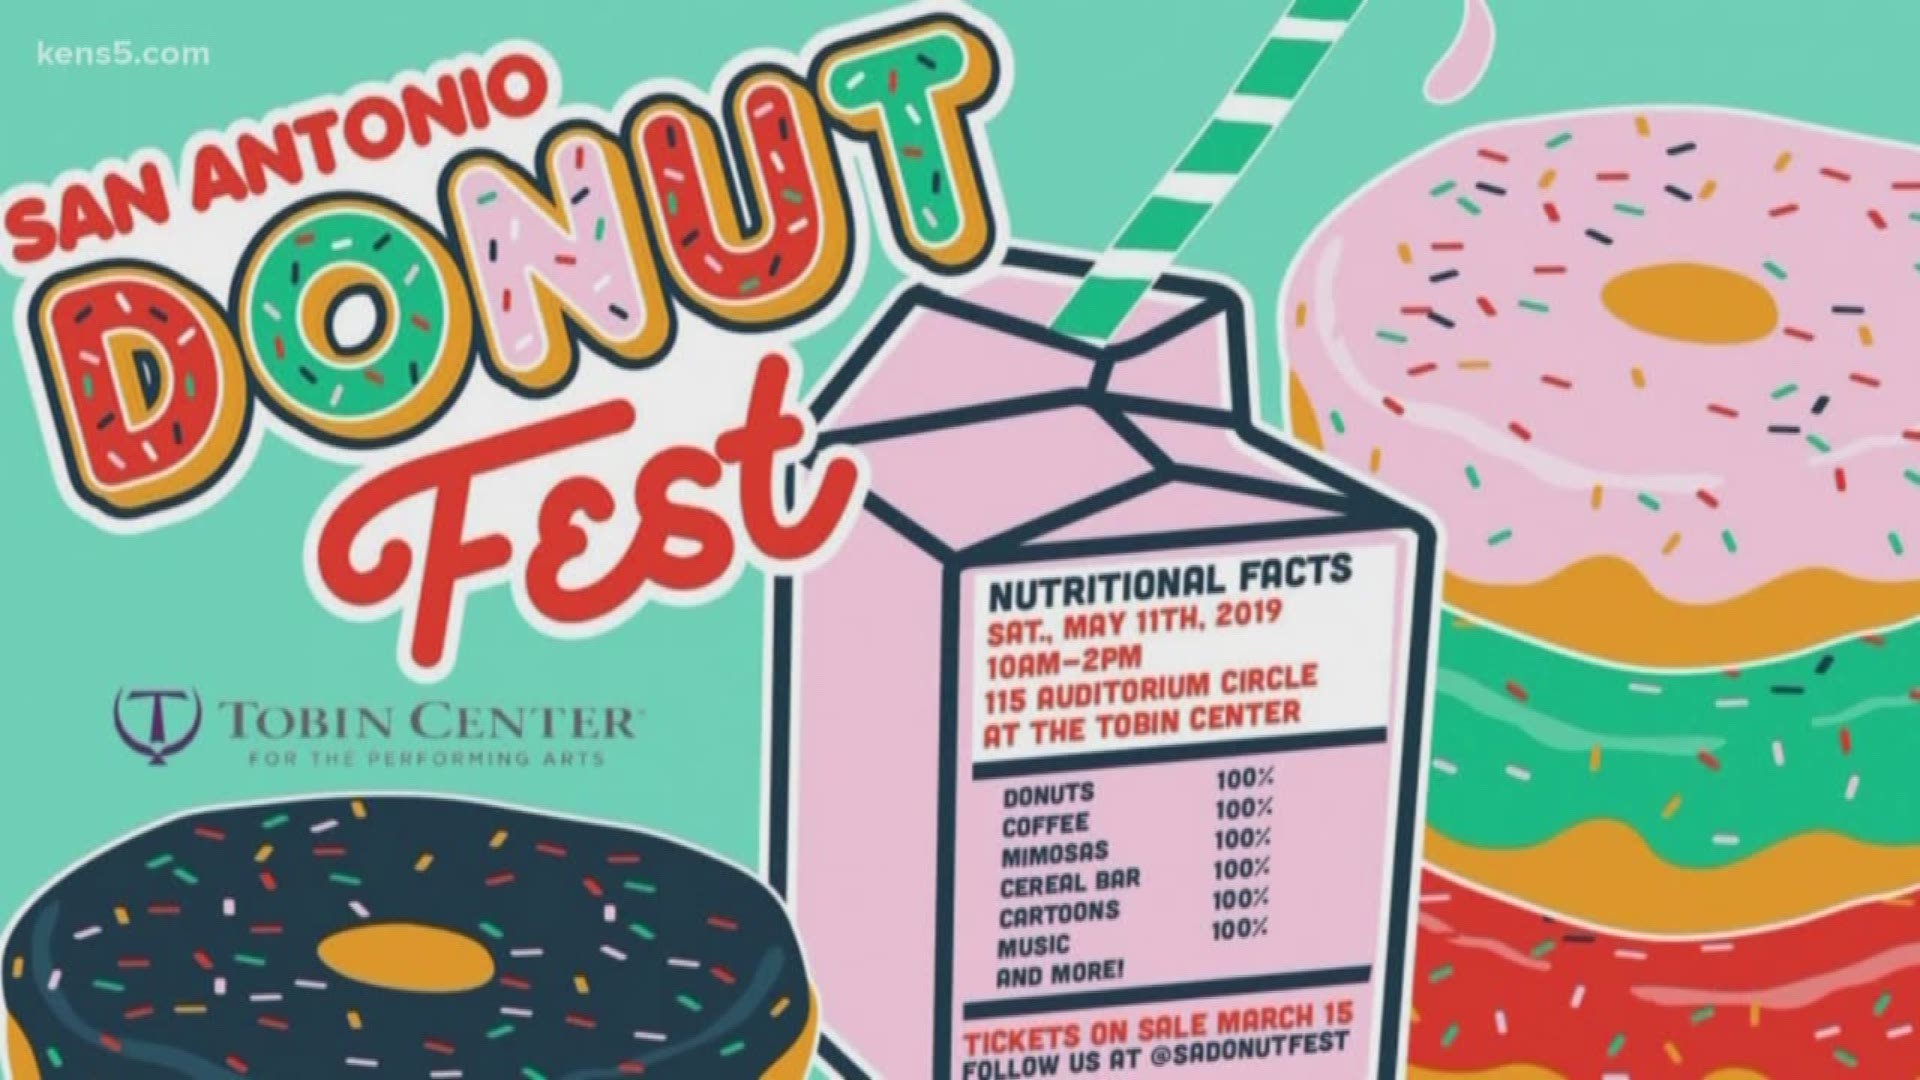 Digital Journalist Nia Wesley tells us more about San Antonio's first ever donut fest!